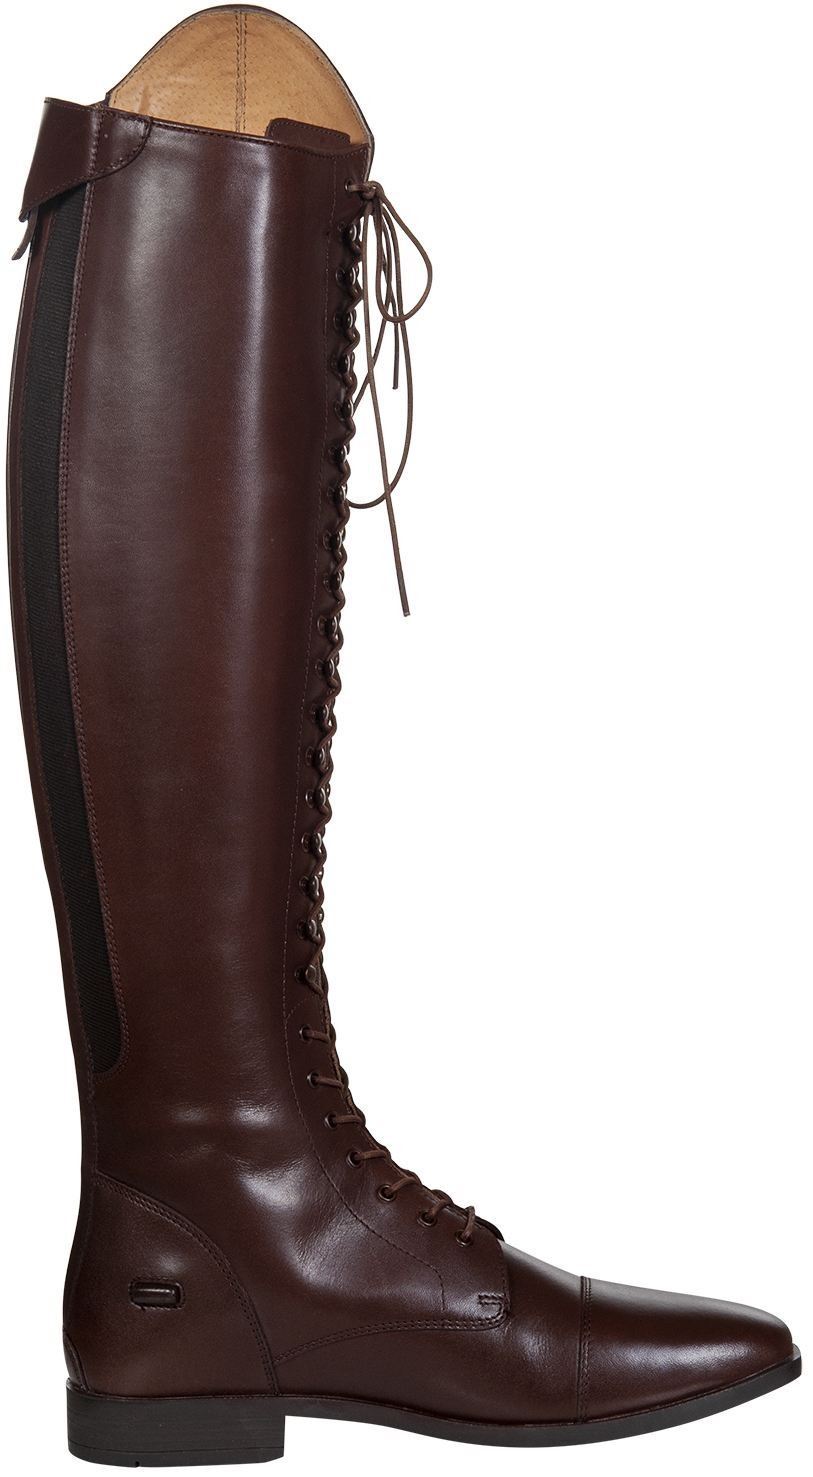 HKM Riding Boots Elegant Lace Long - Just Horse Riders